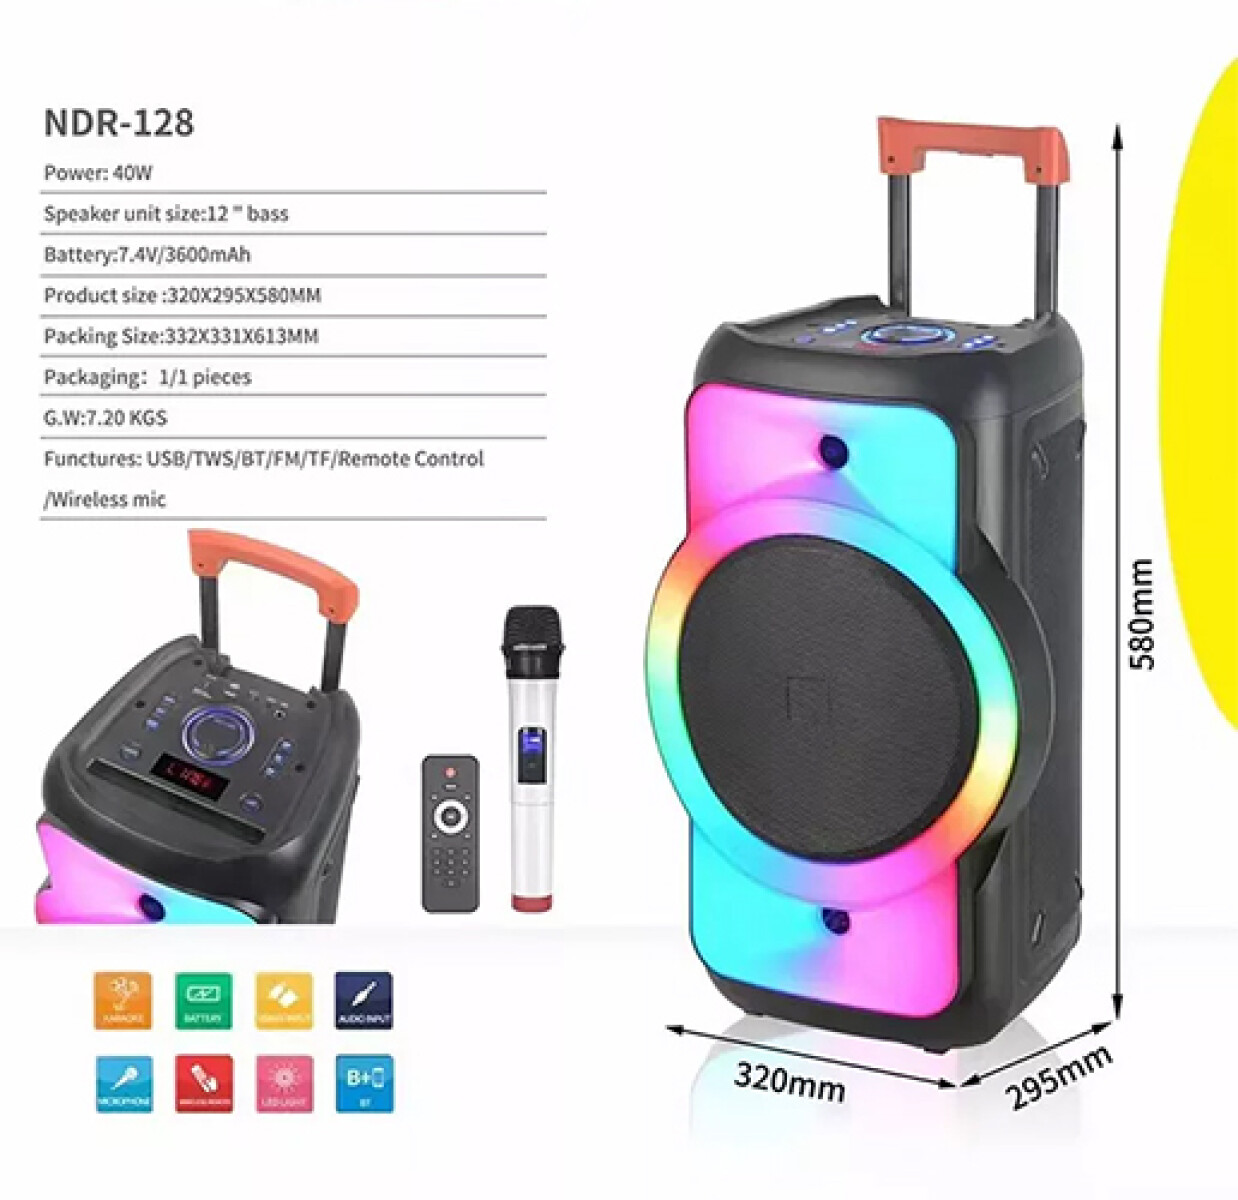 PARLANTE ** NDR-128 Party Speaker 12” -Bluetooth + Control + - Sin color 